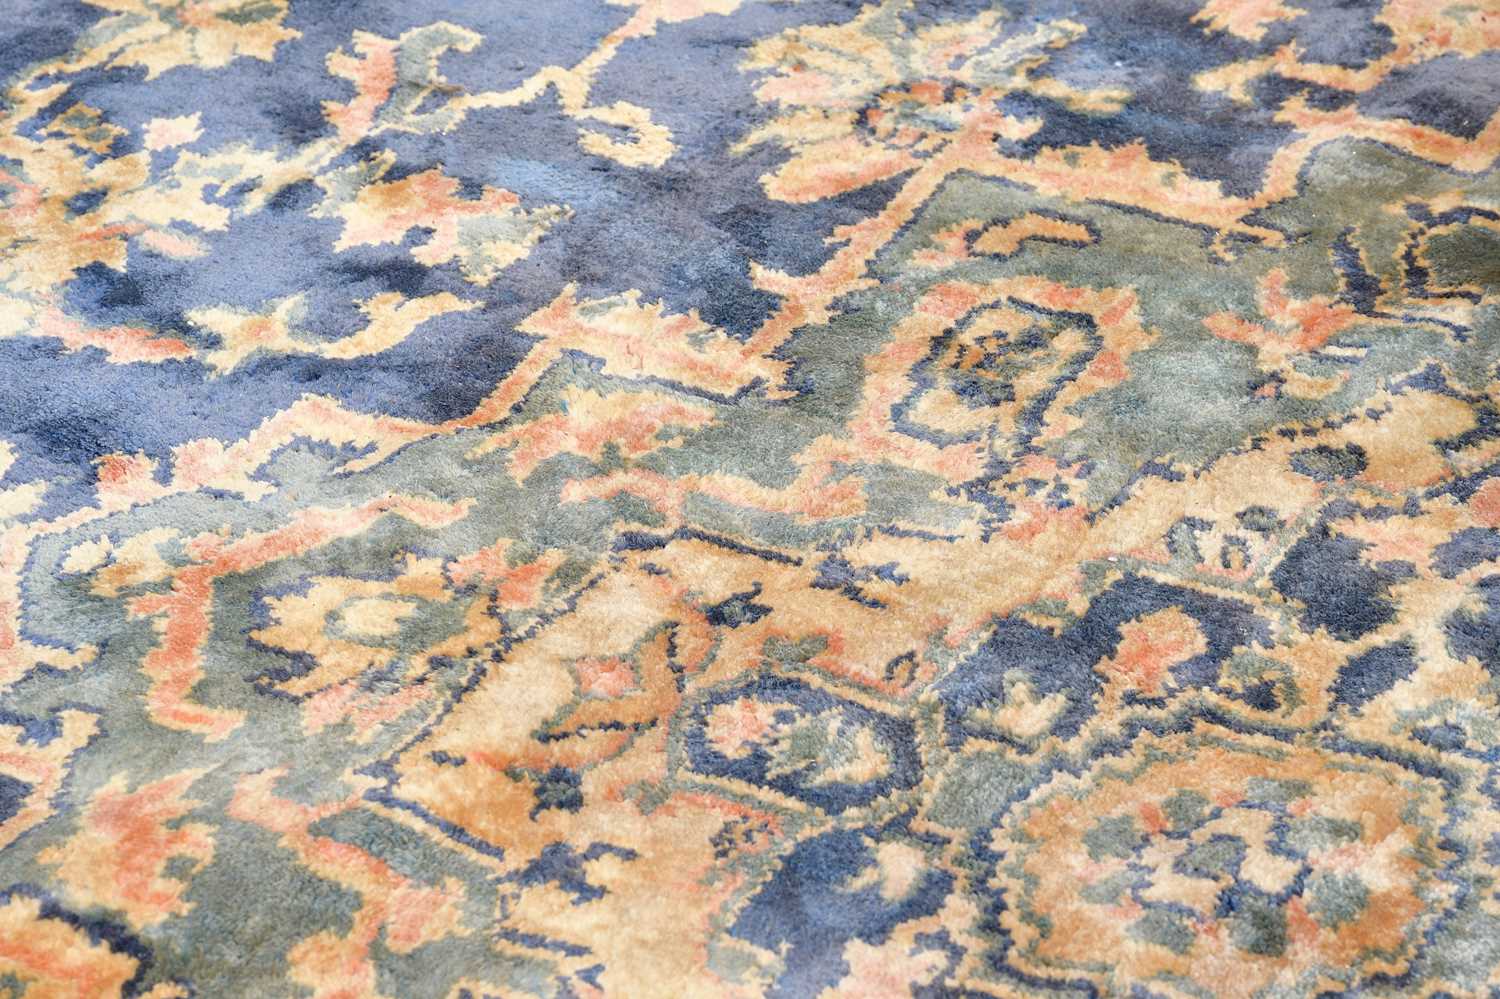 A decorative eastern style rug with floral decoration on blue and orange ground 270cm x 182cm. - Image 3 of 3